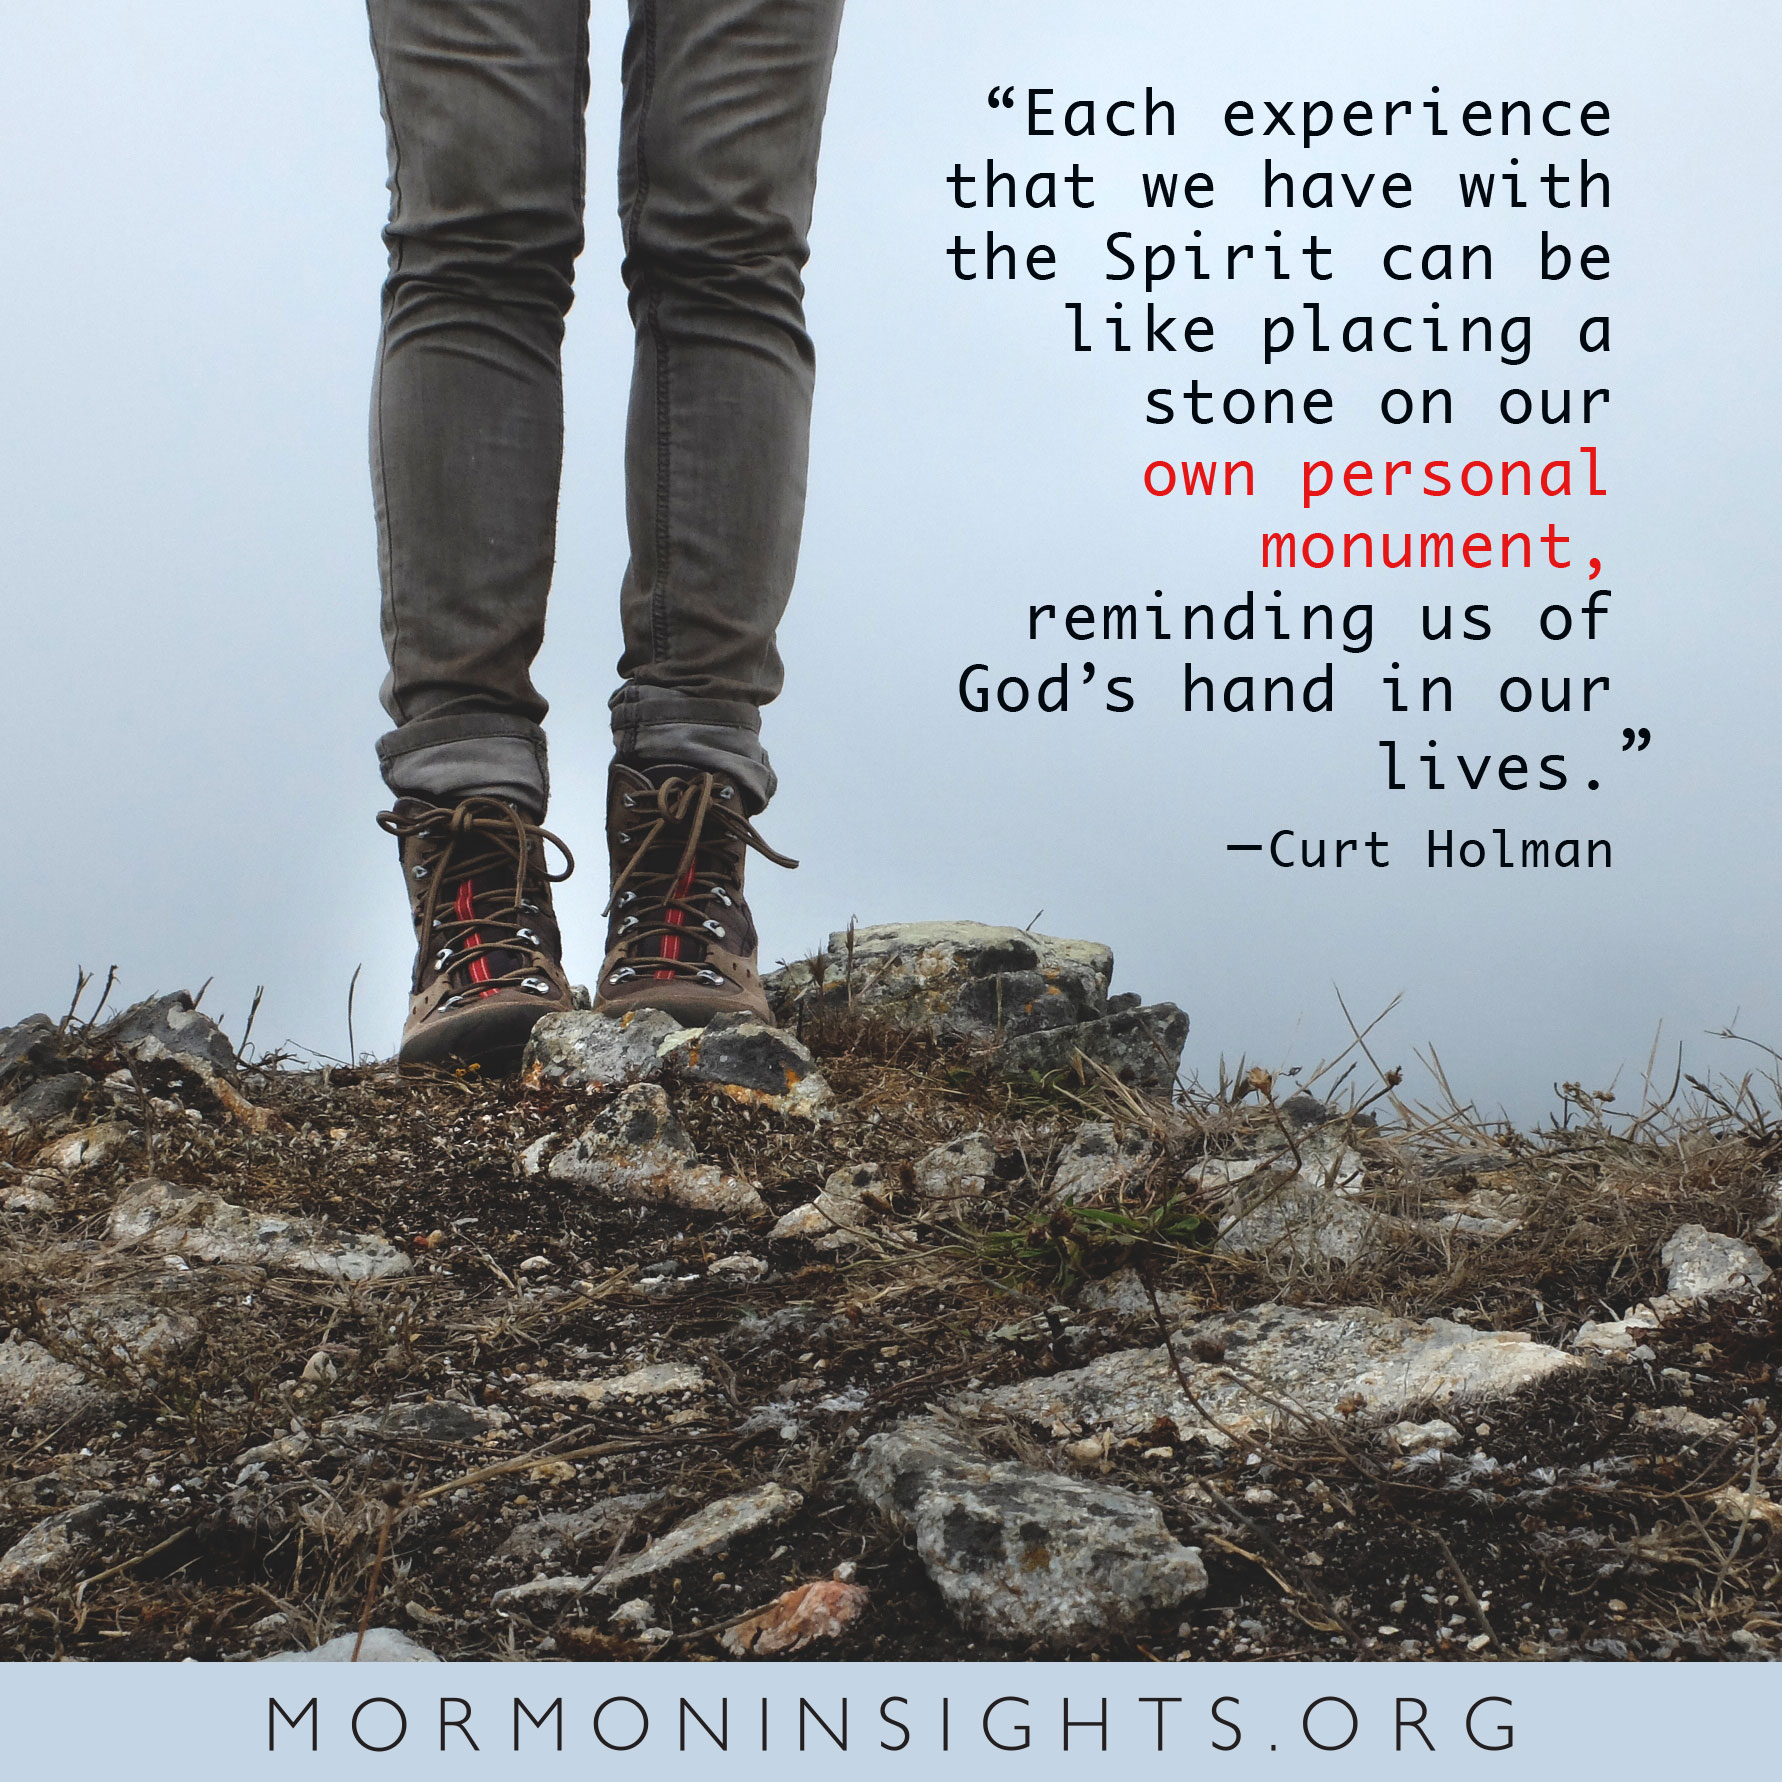 "Each experience that we have with the Spirit can be like placing a stone on our own personal monument, reminding us of God's hand in our lives." -Curt Holman. hiker's boots standing among rocks and dirt and twigs.